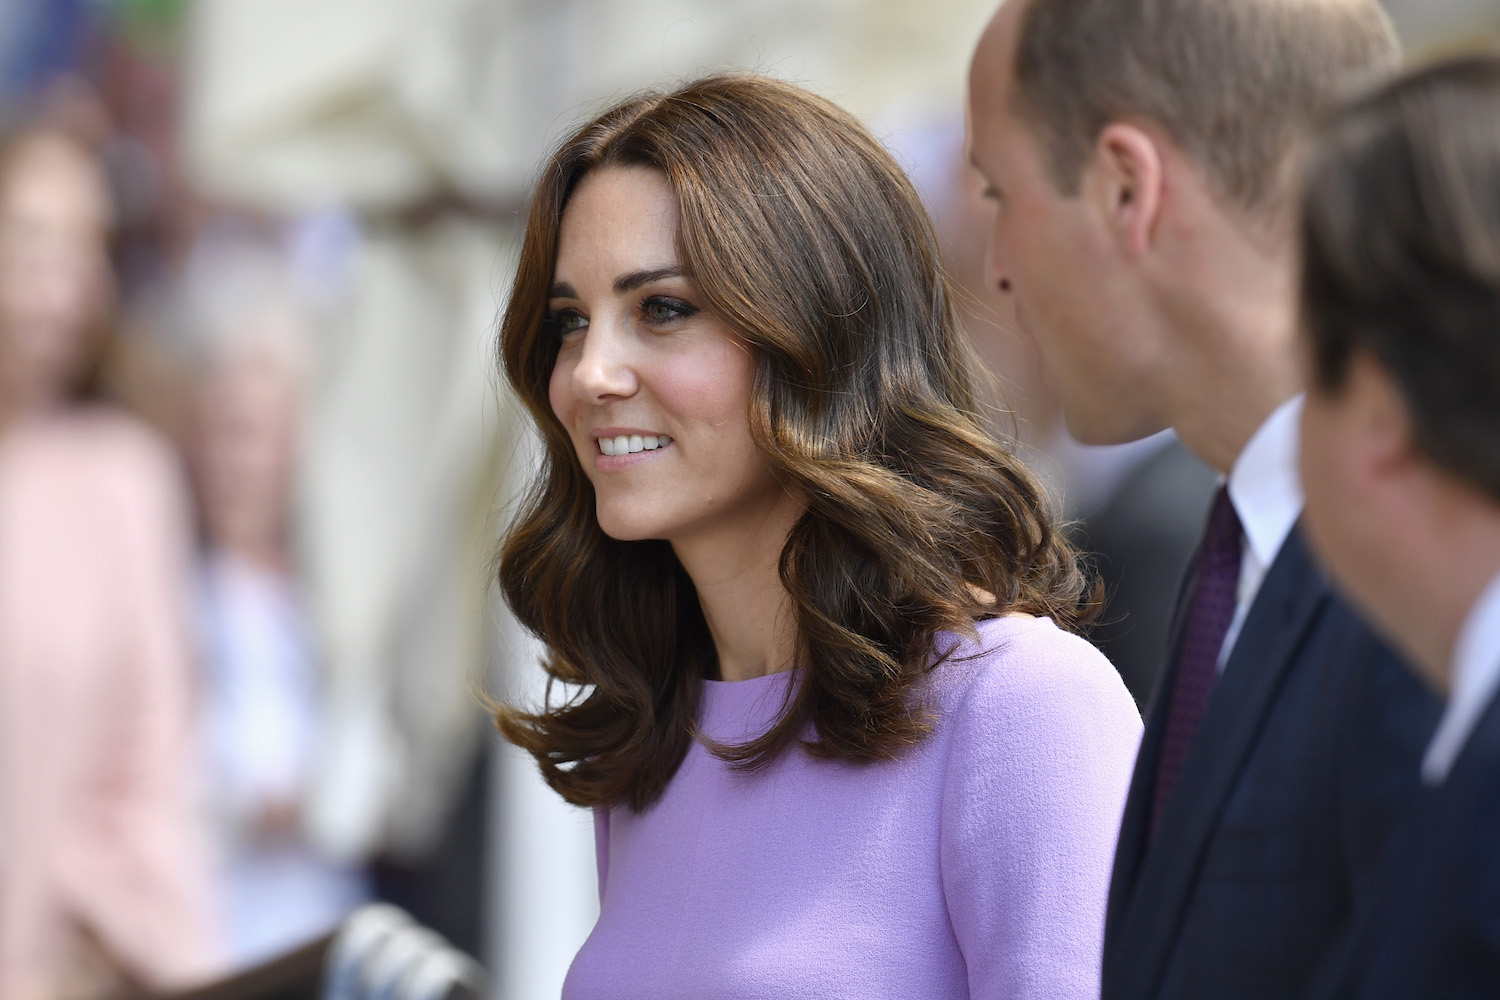 News Just In: The Most Stylish Royal Isn’t Kate Middleton